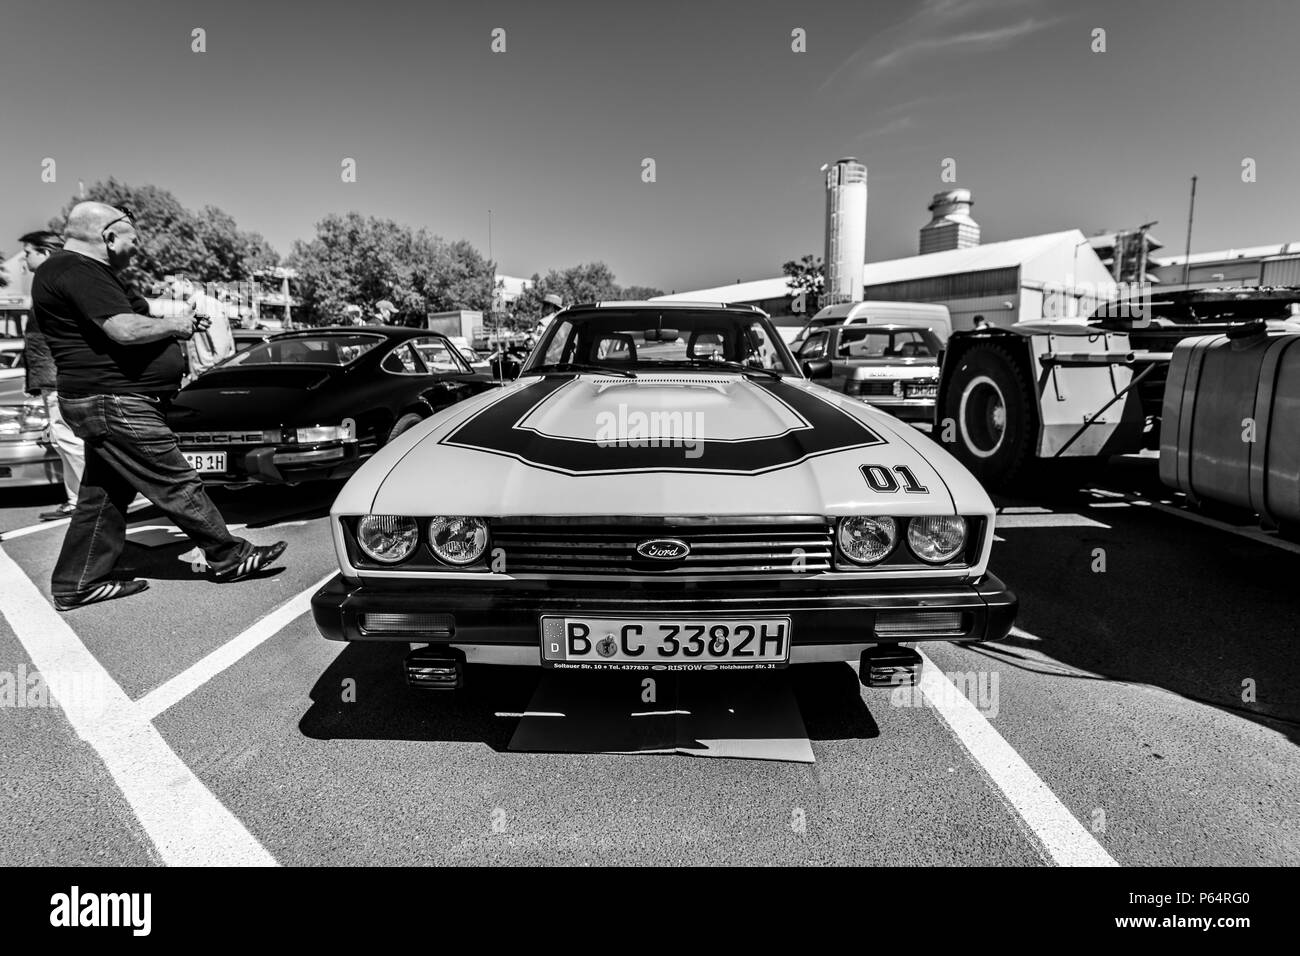 BERLIN - MAY 06, 2018: Mid-size sports car Ford Capri Mk III. Black and white. Oldtimertage Berlin-Brandenburg (31th Berlin-Brandenburg Oldtimer Day). Stock Photo